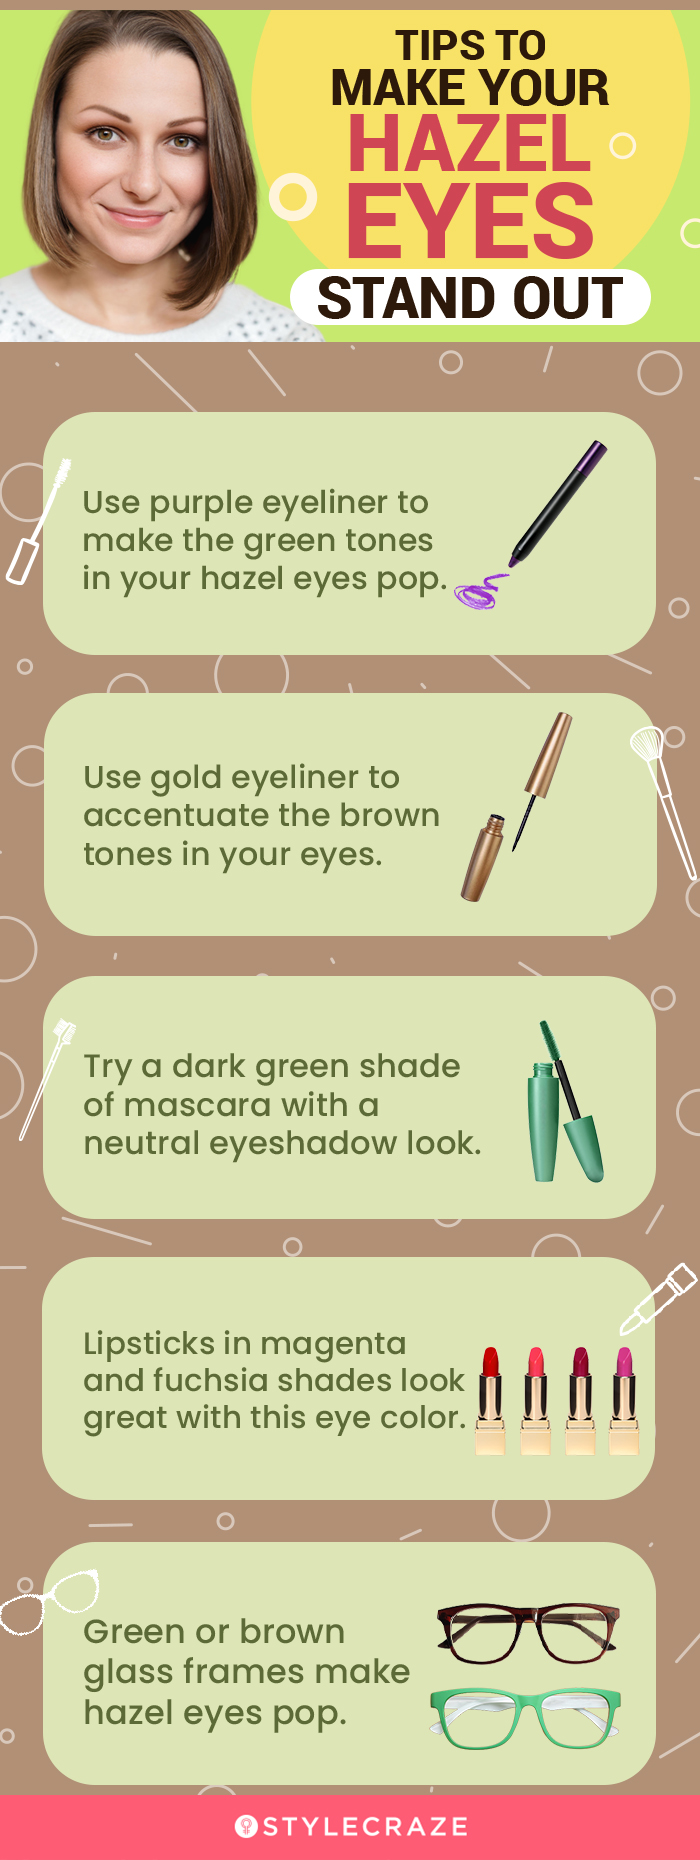 tips to make your hazel eyes stand out [infographic]